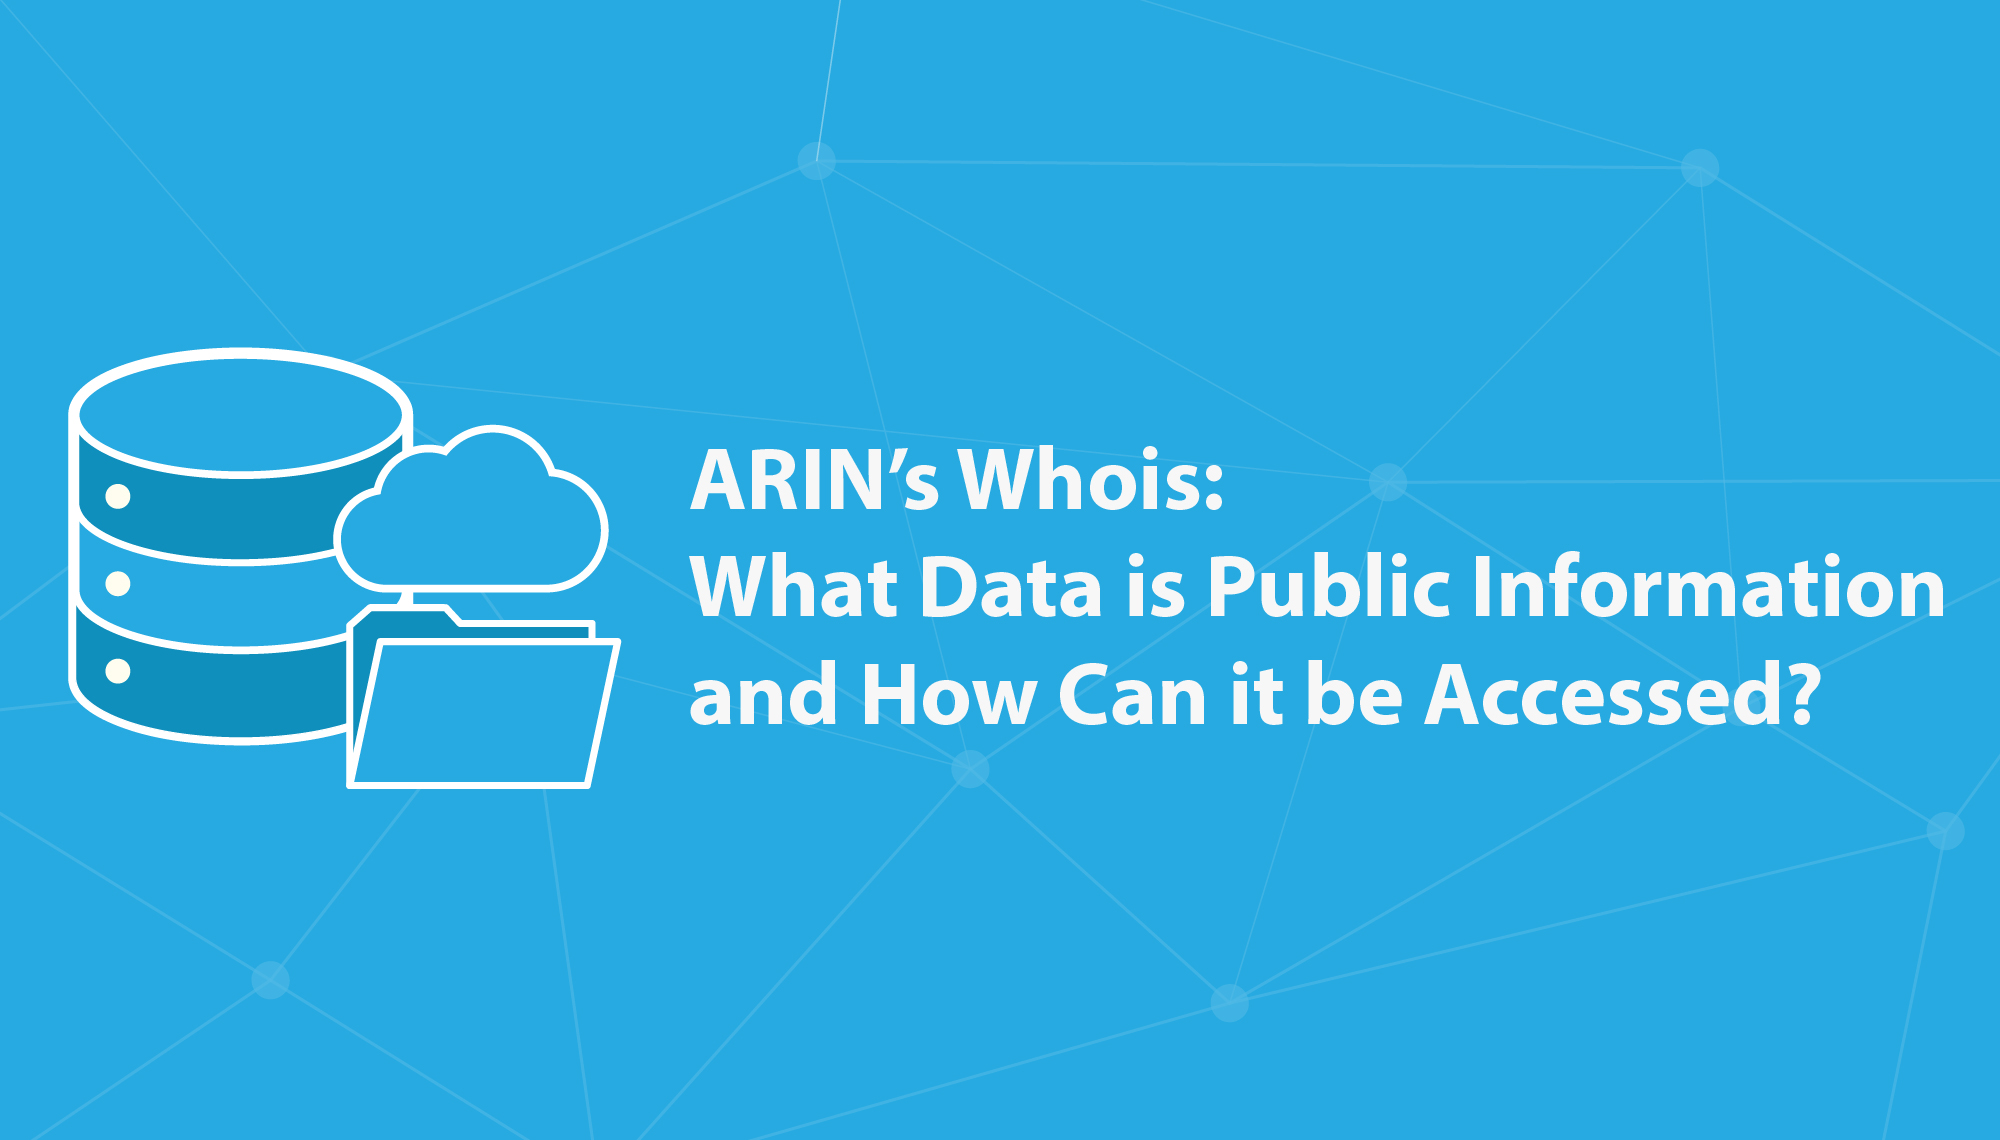 ARIN's Whois: What Data is Public Information and How Can it be